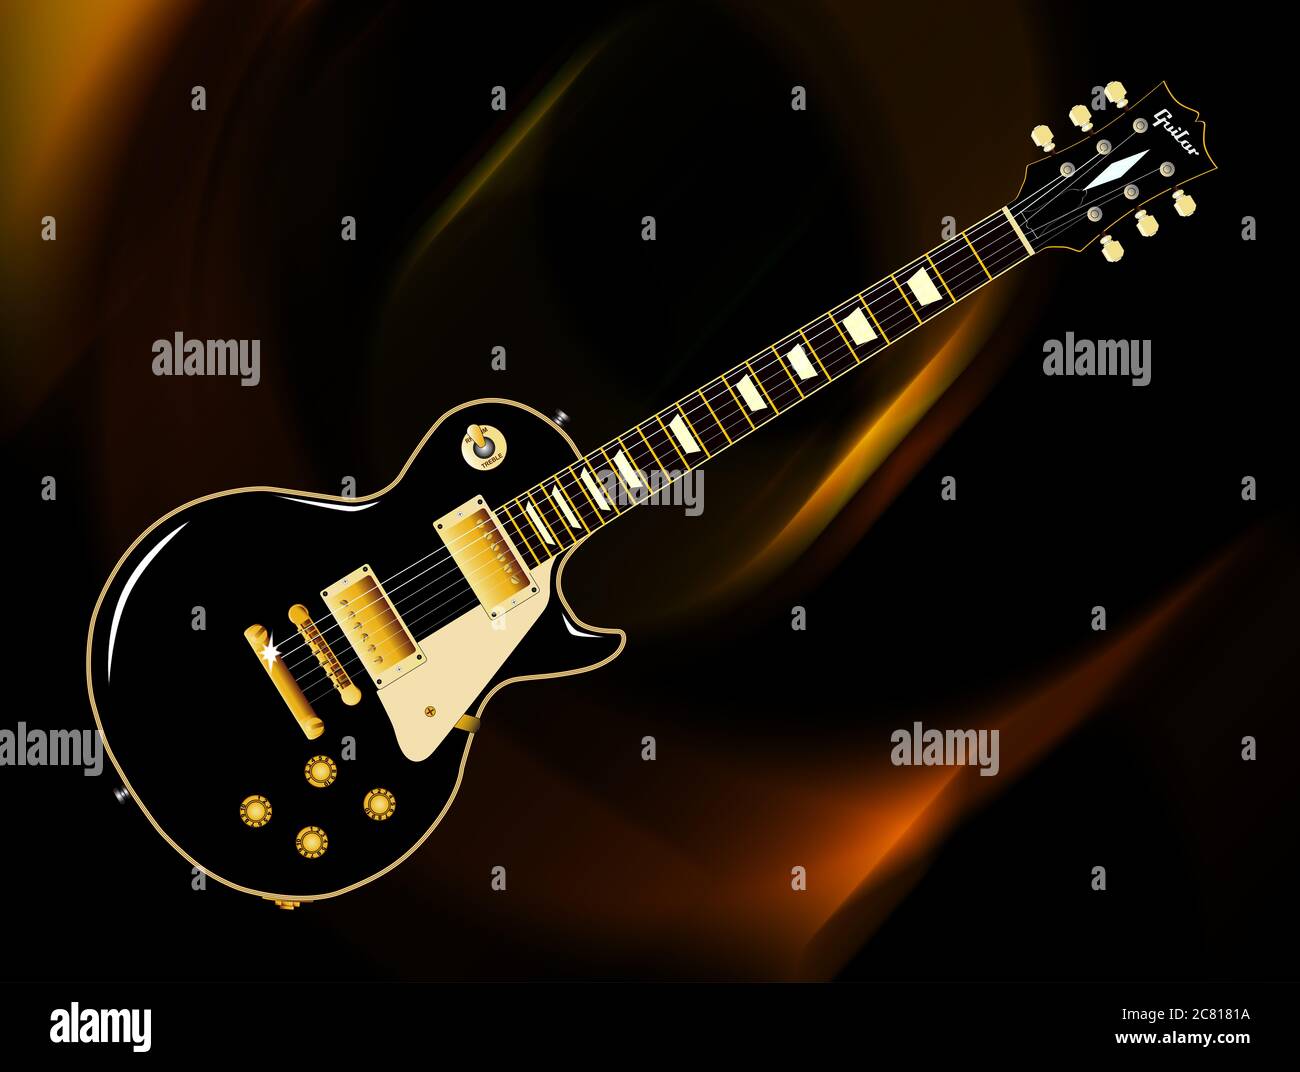 The definitive rock and roll guitar in black, isolated over a black background. Stock Photo